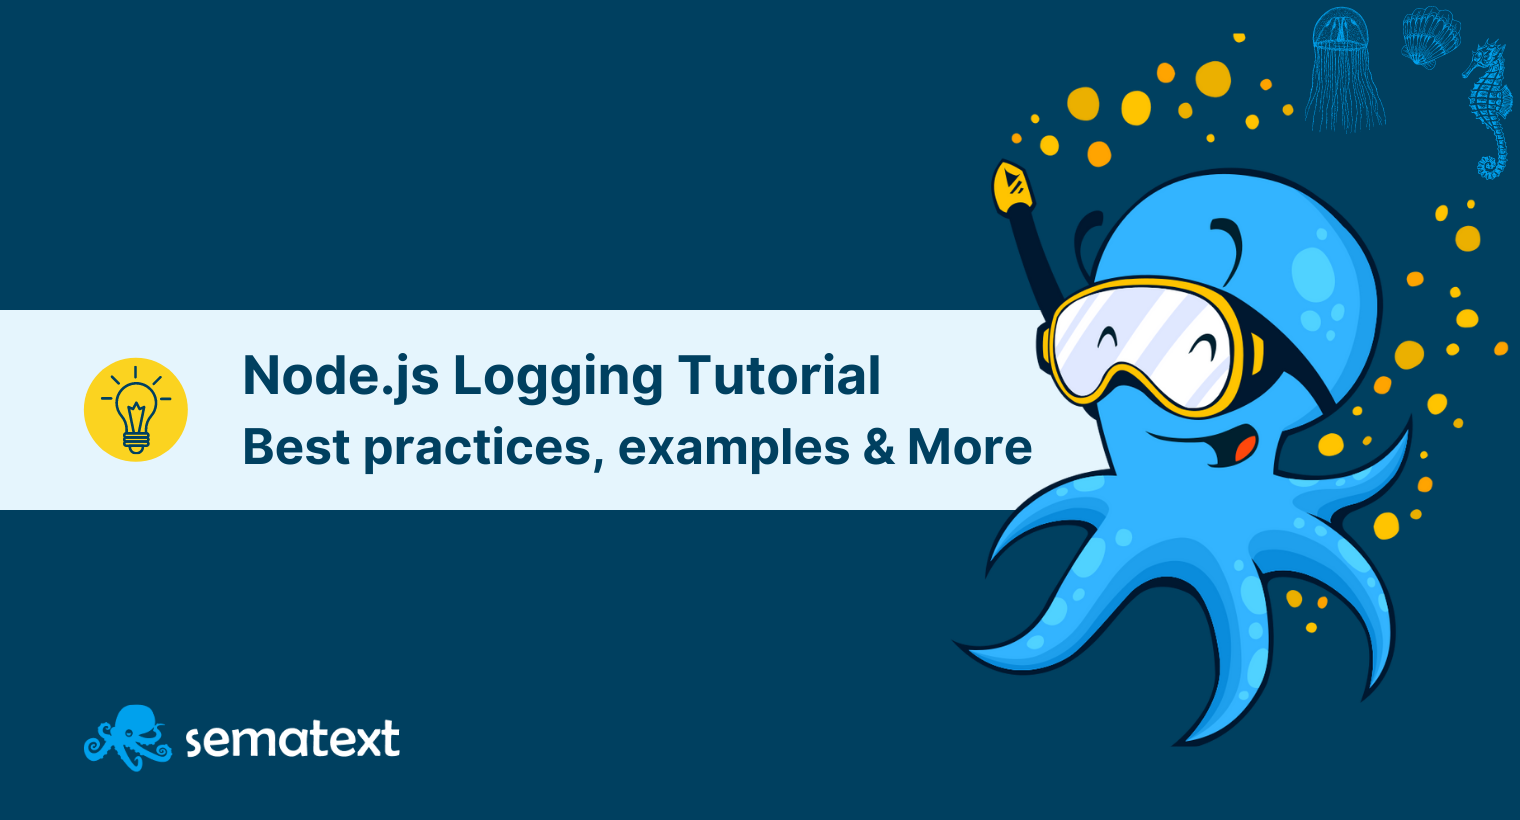 Node.js Logging Best Practices: A Complete Guide to Getting Started with Logs